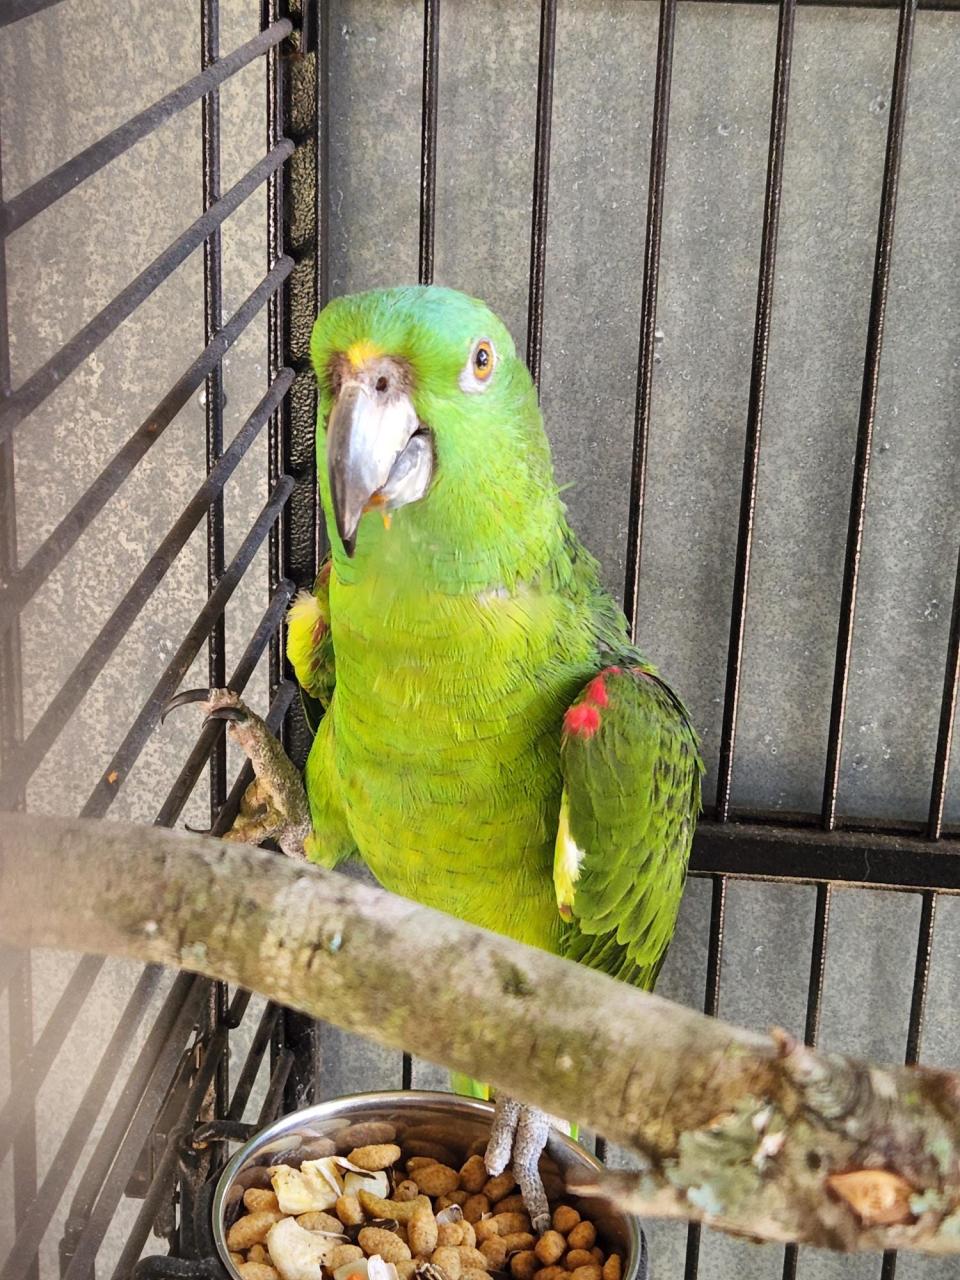 An Amazon parrot named Tiki was among more than 160 birds that were rescued from a Fort Walton Beach home earlier this month after their owner passed away. Tiki was taken in by the Alaqua Animal Refuge and will be available for adoption once it is medically cleared.